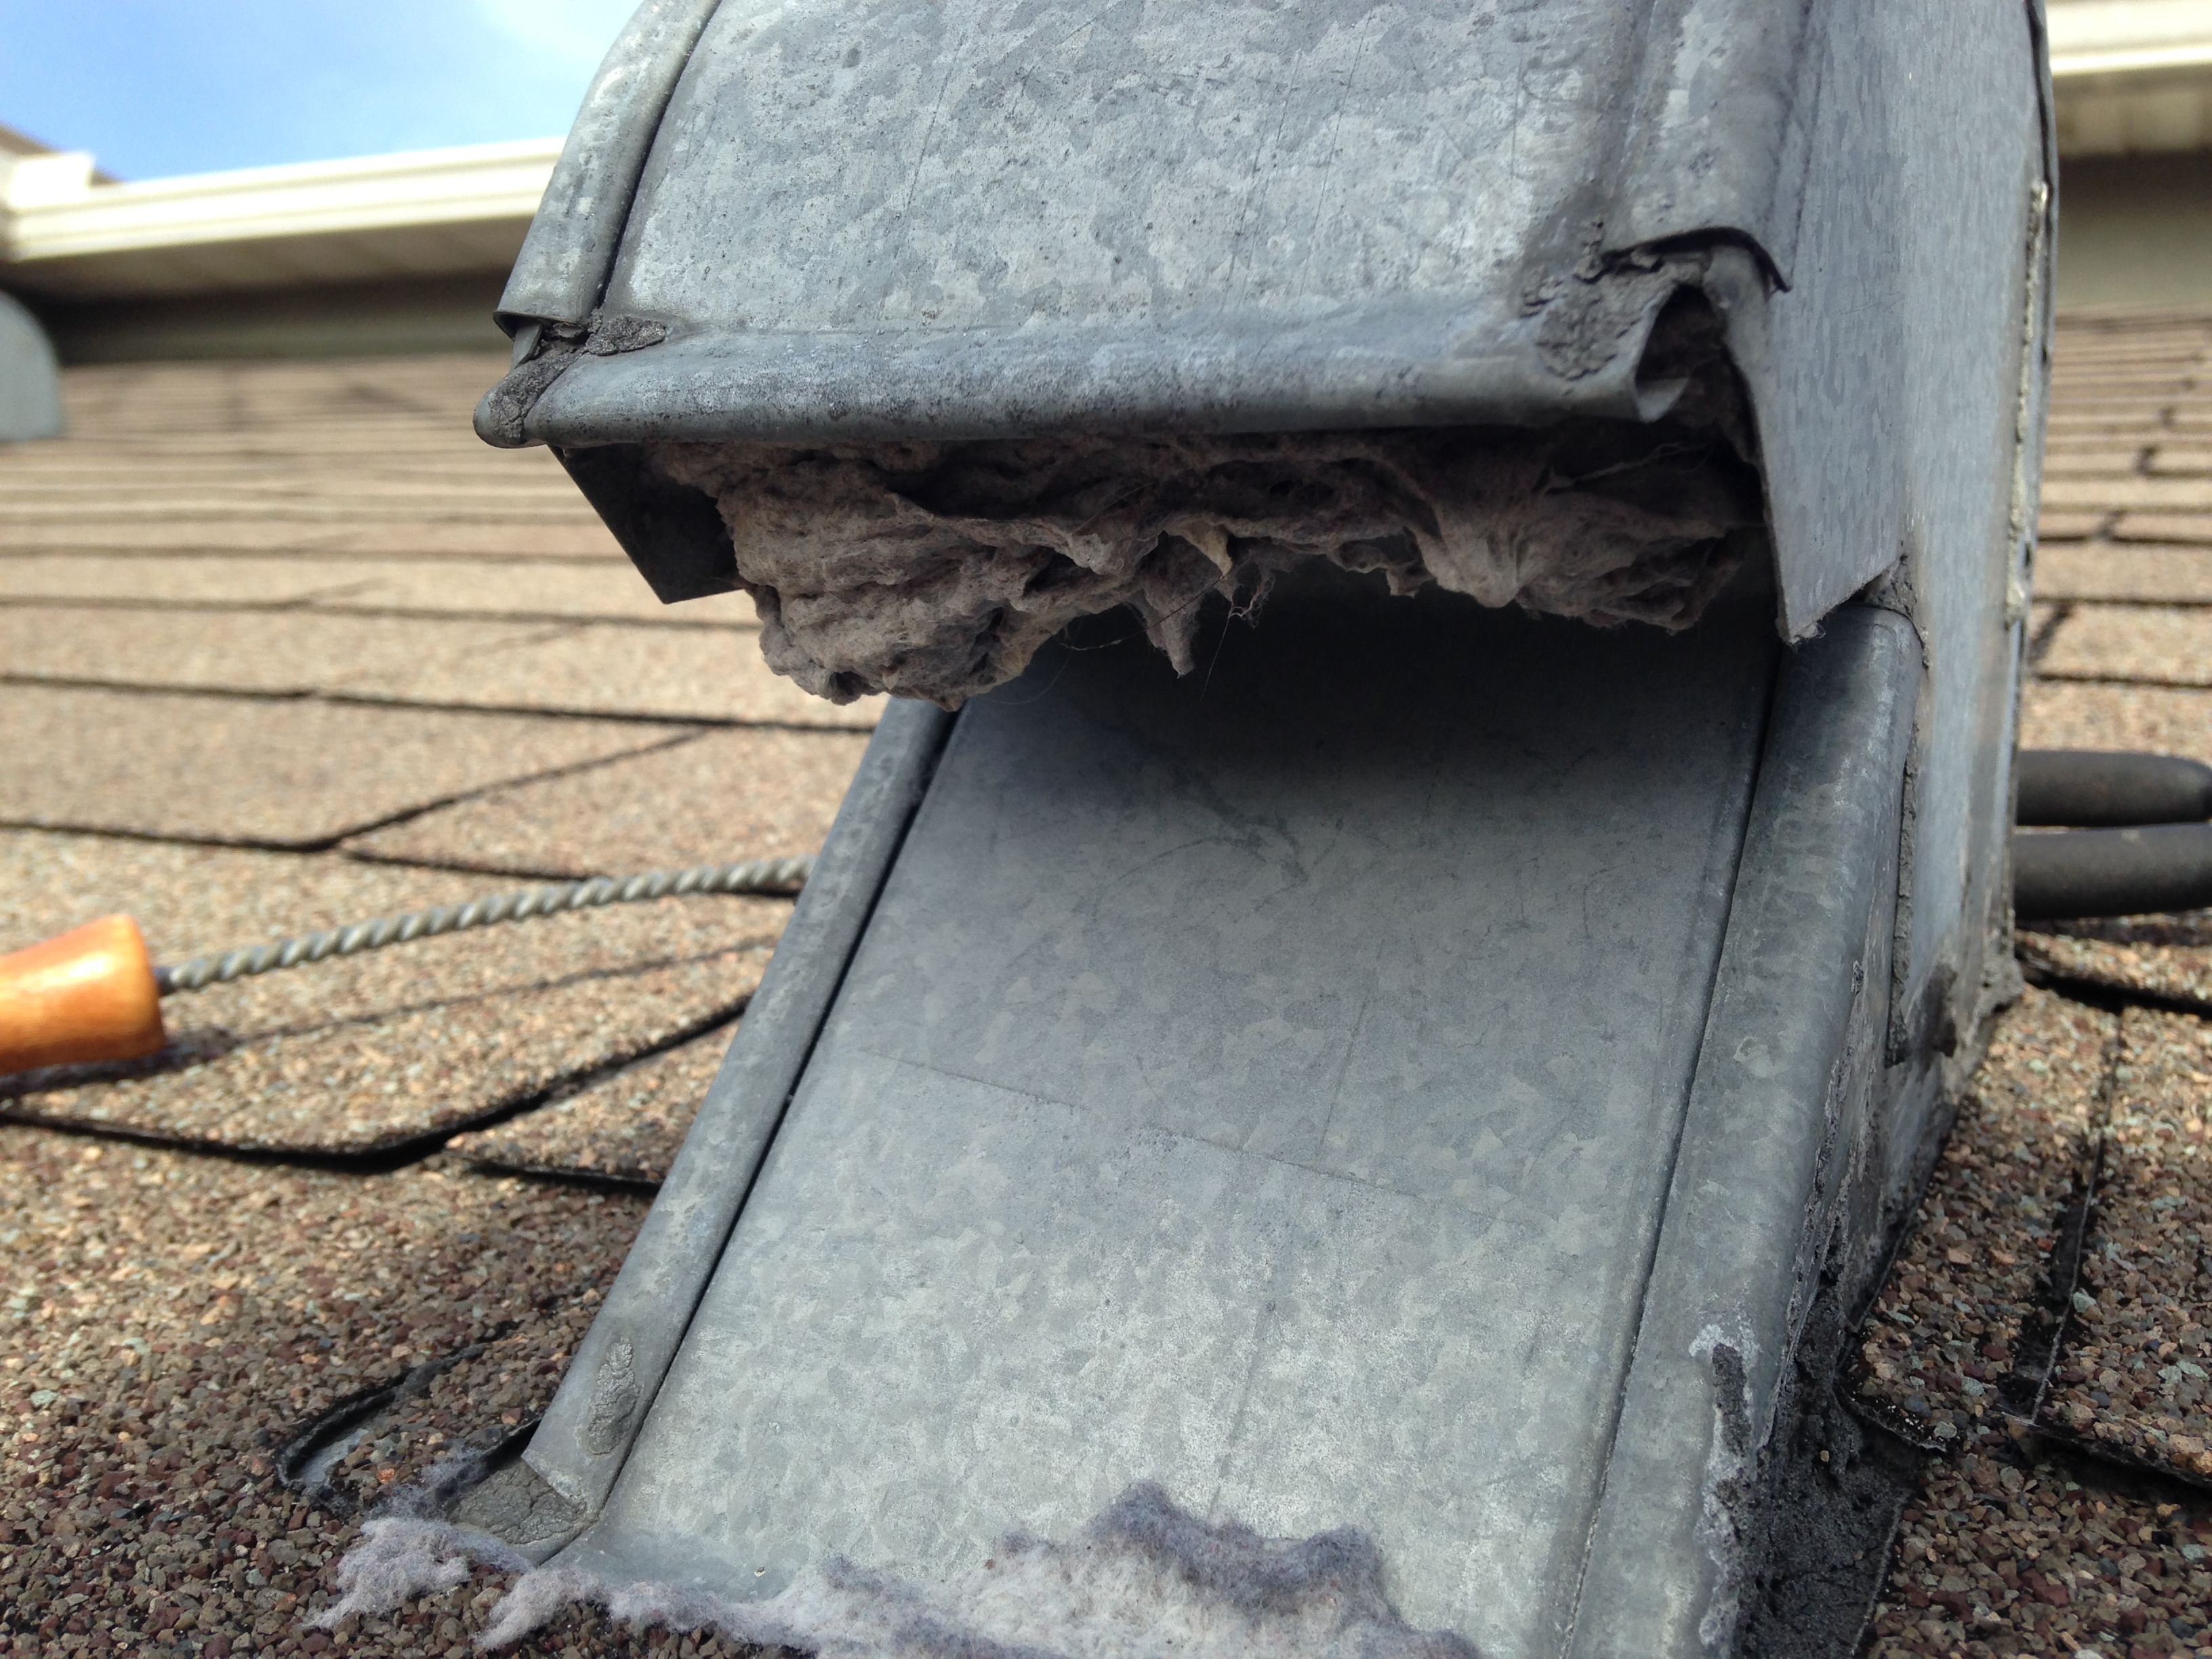 How To Clean Roof Dryer Vent 